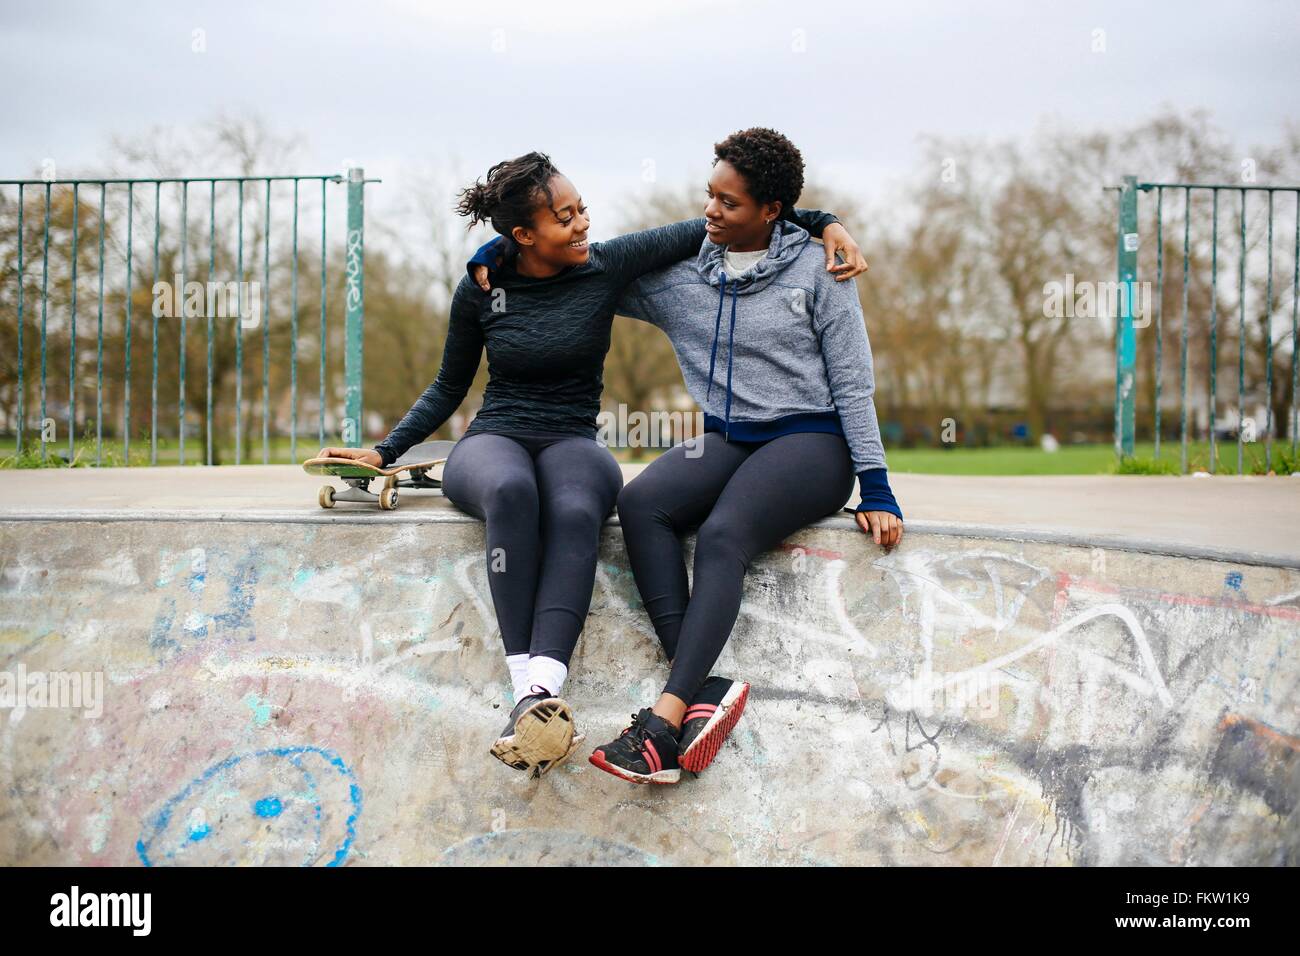 Two young female skateboarding friends sitting in skateboard park Stock Photo